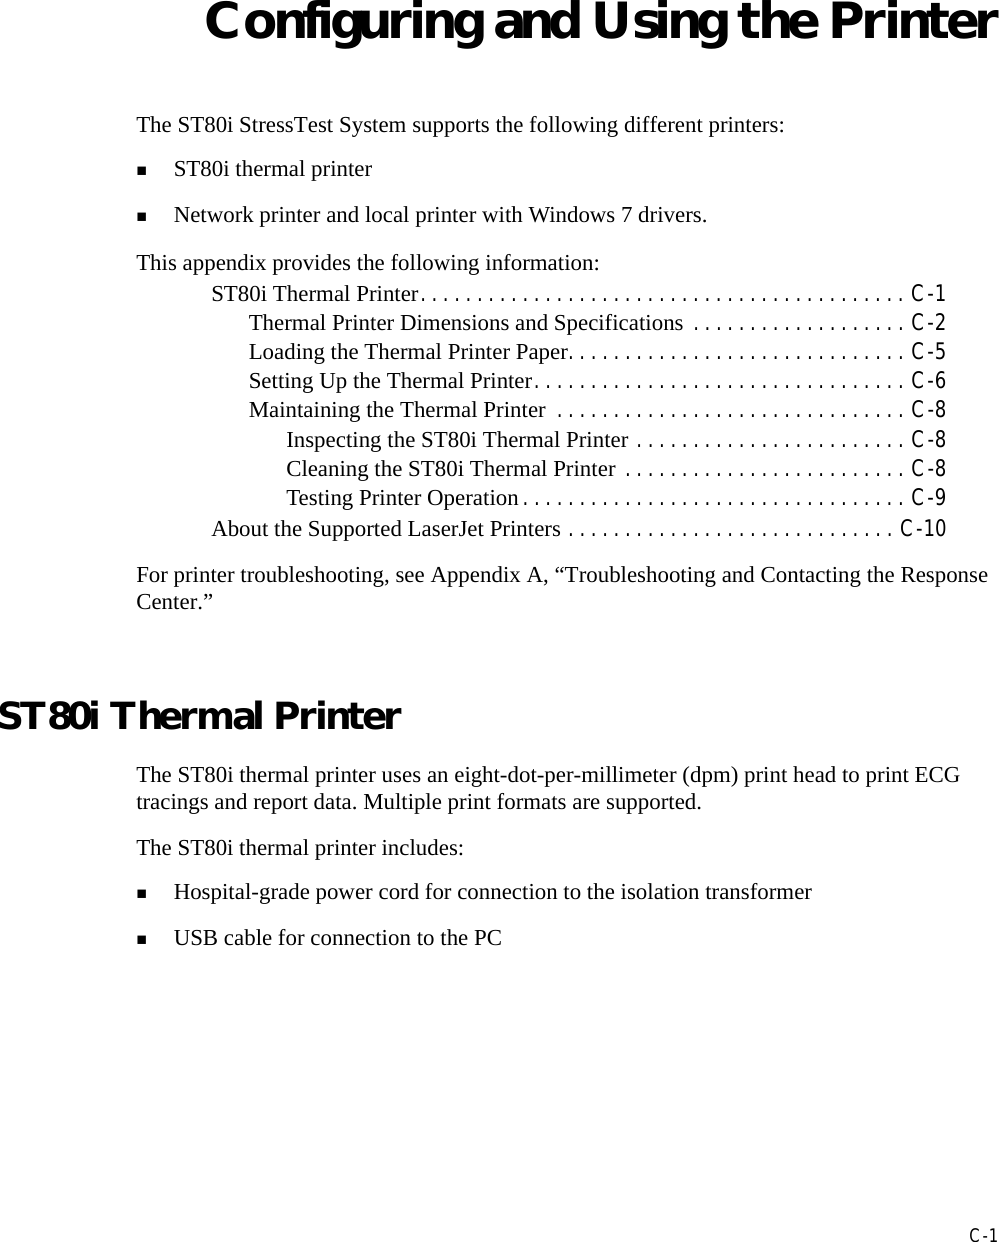 CC-1Appendix AConfiguring and Using the PrinterThe ST80i StressTest System supports the following different printers: ST80i thermal printerNetwork printer and local printer with Windows 7 drivers.This appendix provides the following information:ST80i Thermal Printer. . . . . . . . . . . . . . . . . . . . . . . . . . . . . . . . . . . . . . . . . . . C-1Thermal Printer Dimensions and Specifications . . . . . . . . . . . . . . . . . . . C-2Loading the Thermal Printer Paper. . . . . . . . . . . . . . . . . . . . . . . . . . . . . . C-5Setting Up the Thermal Printer. . . . . . . . . . . . . . . . . . . . . . . . . . . . . . . . . C-6Maintaining the Thermal Printer  . . . . . . . . . . . . . . . . . . . . . . . . . . . . . . . C-8Inspecting the ST80i Thermal Printer . . . . . . . . . . . . . . . . . . . . . . . . C-8Cleaning the ST80i Thermal Printer . . . . . . . . . . . . . . . . . . . . . . . . . C-8Testing Printer Operation . . . . . . . . . . . . . . . . . . . . . . . . . . . . . . . . . . C-9About the Supported LaserJet Printers . . . . . . . . . . . . . . . . . . . . . . . . . . . . . C-10For printer troubleshooting, see Appendix A, “Troubleshooting and Contacting the Response Center.” ST80i Thermal PrinterThe ST80i thermal printer uses an eight-dot-per-millimeter (dpm) print head to print ECG tracings and report data. Multiple print formats are supported.The ST80i thermal printer includes:Hospital-grade power cord for connection to the isolation transformerUSB cable for connection to the PC